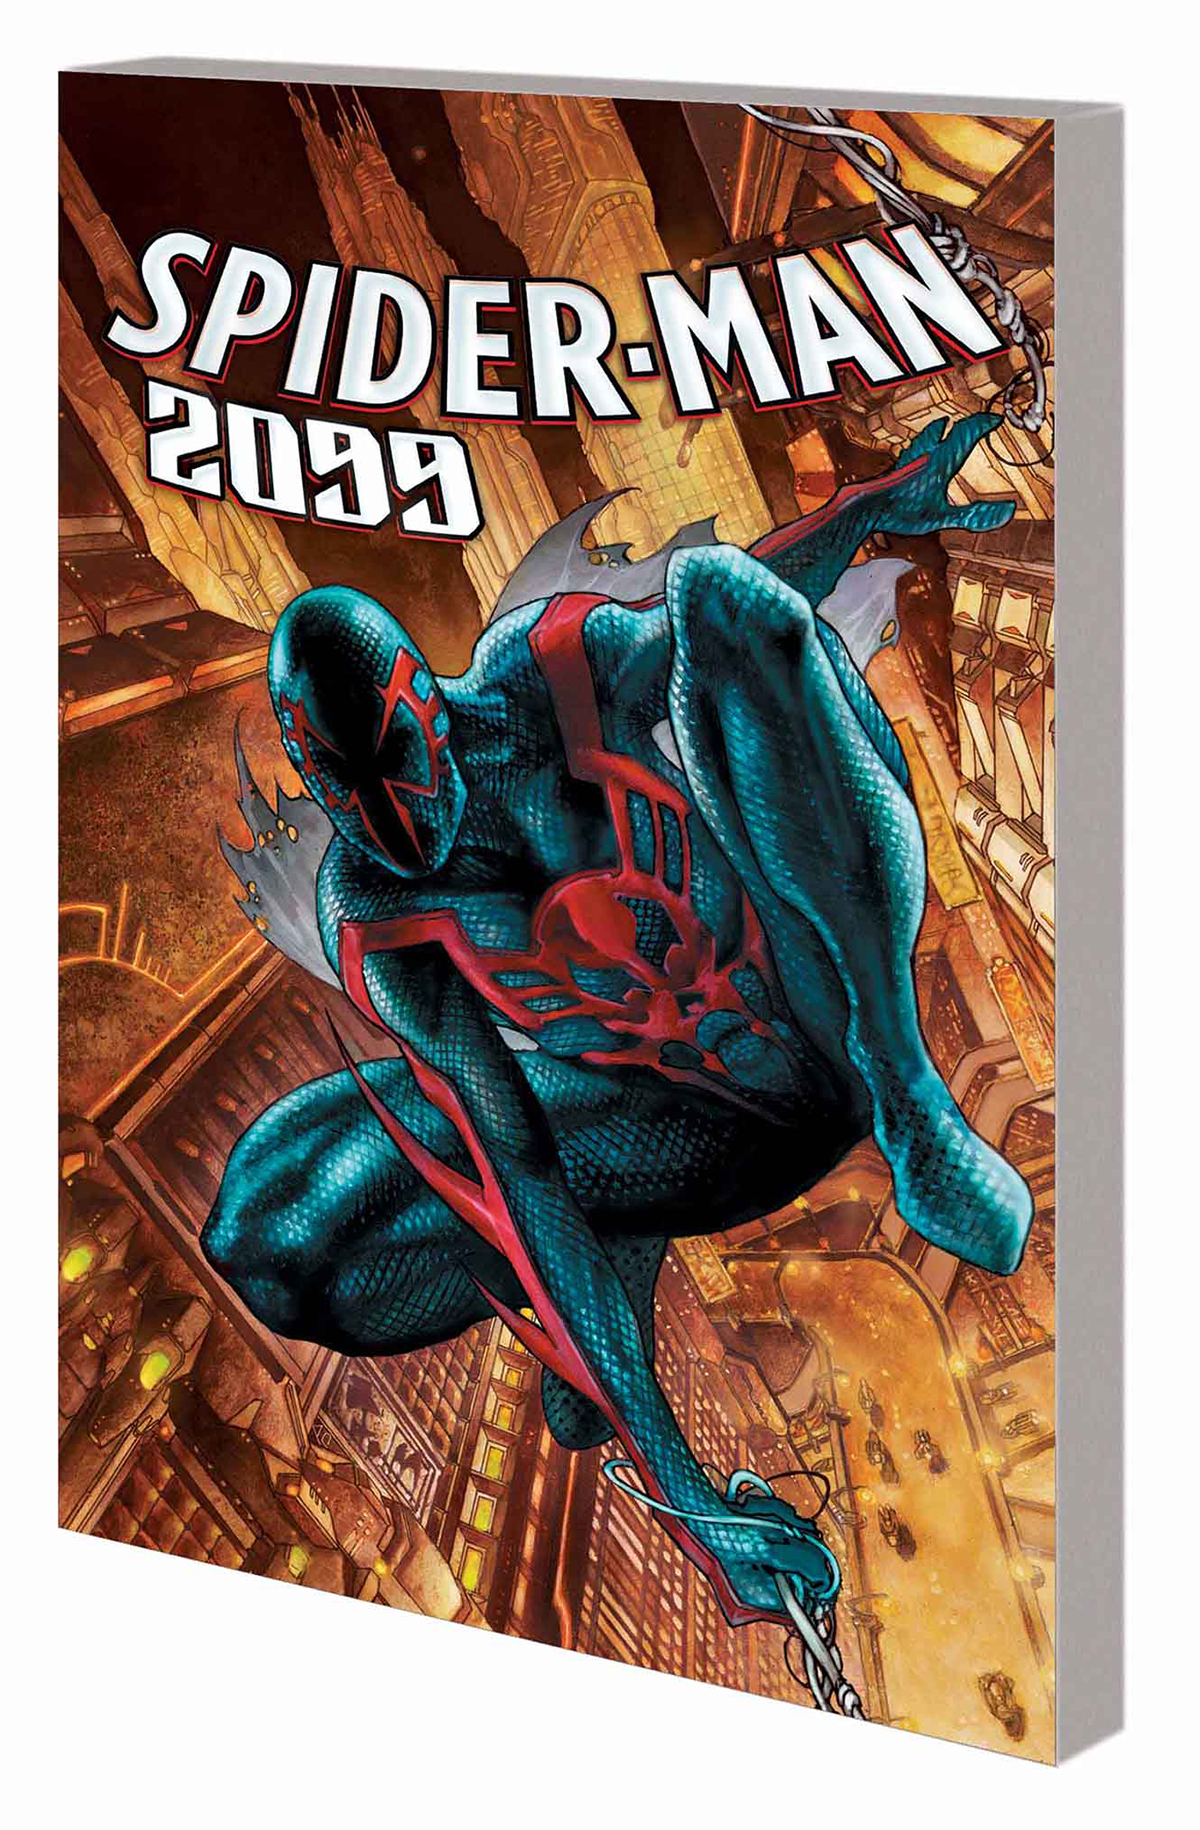 NOV140875 - SPIDER-MAN 2099 TP VOL 01 OUT OF TIME - Free Comic Book Day